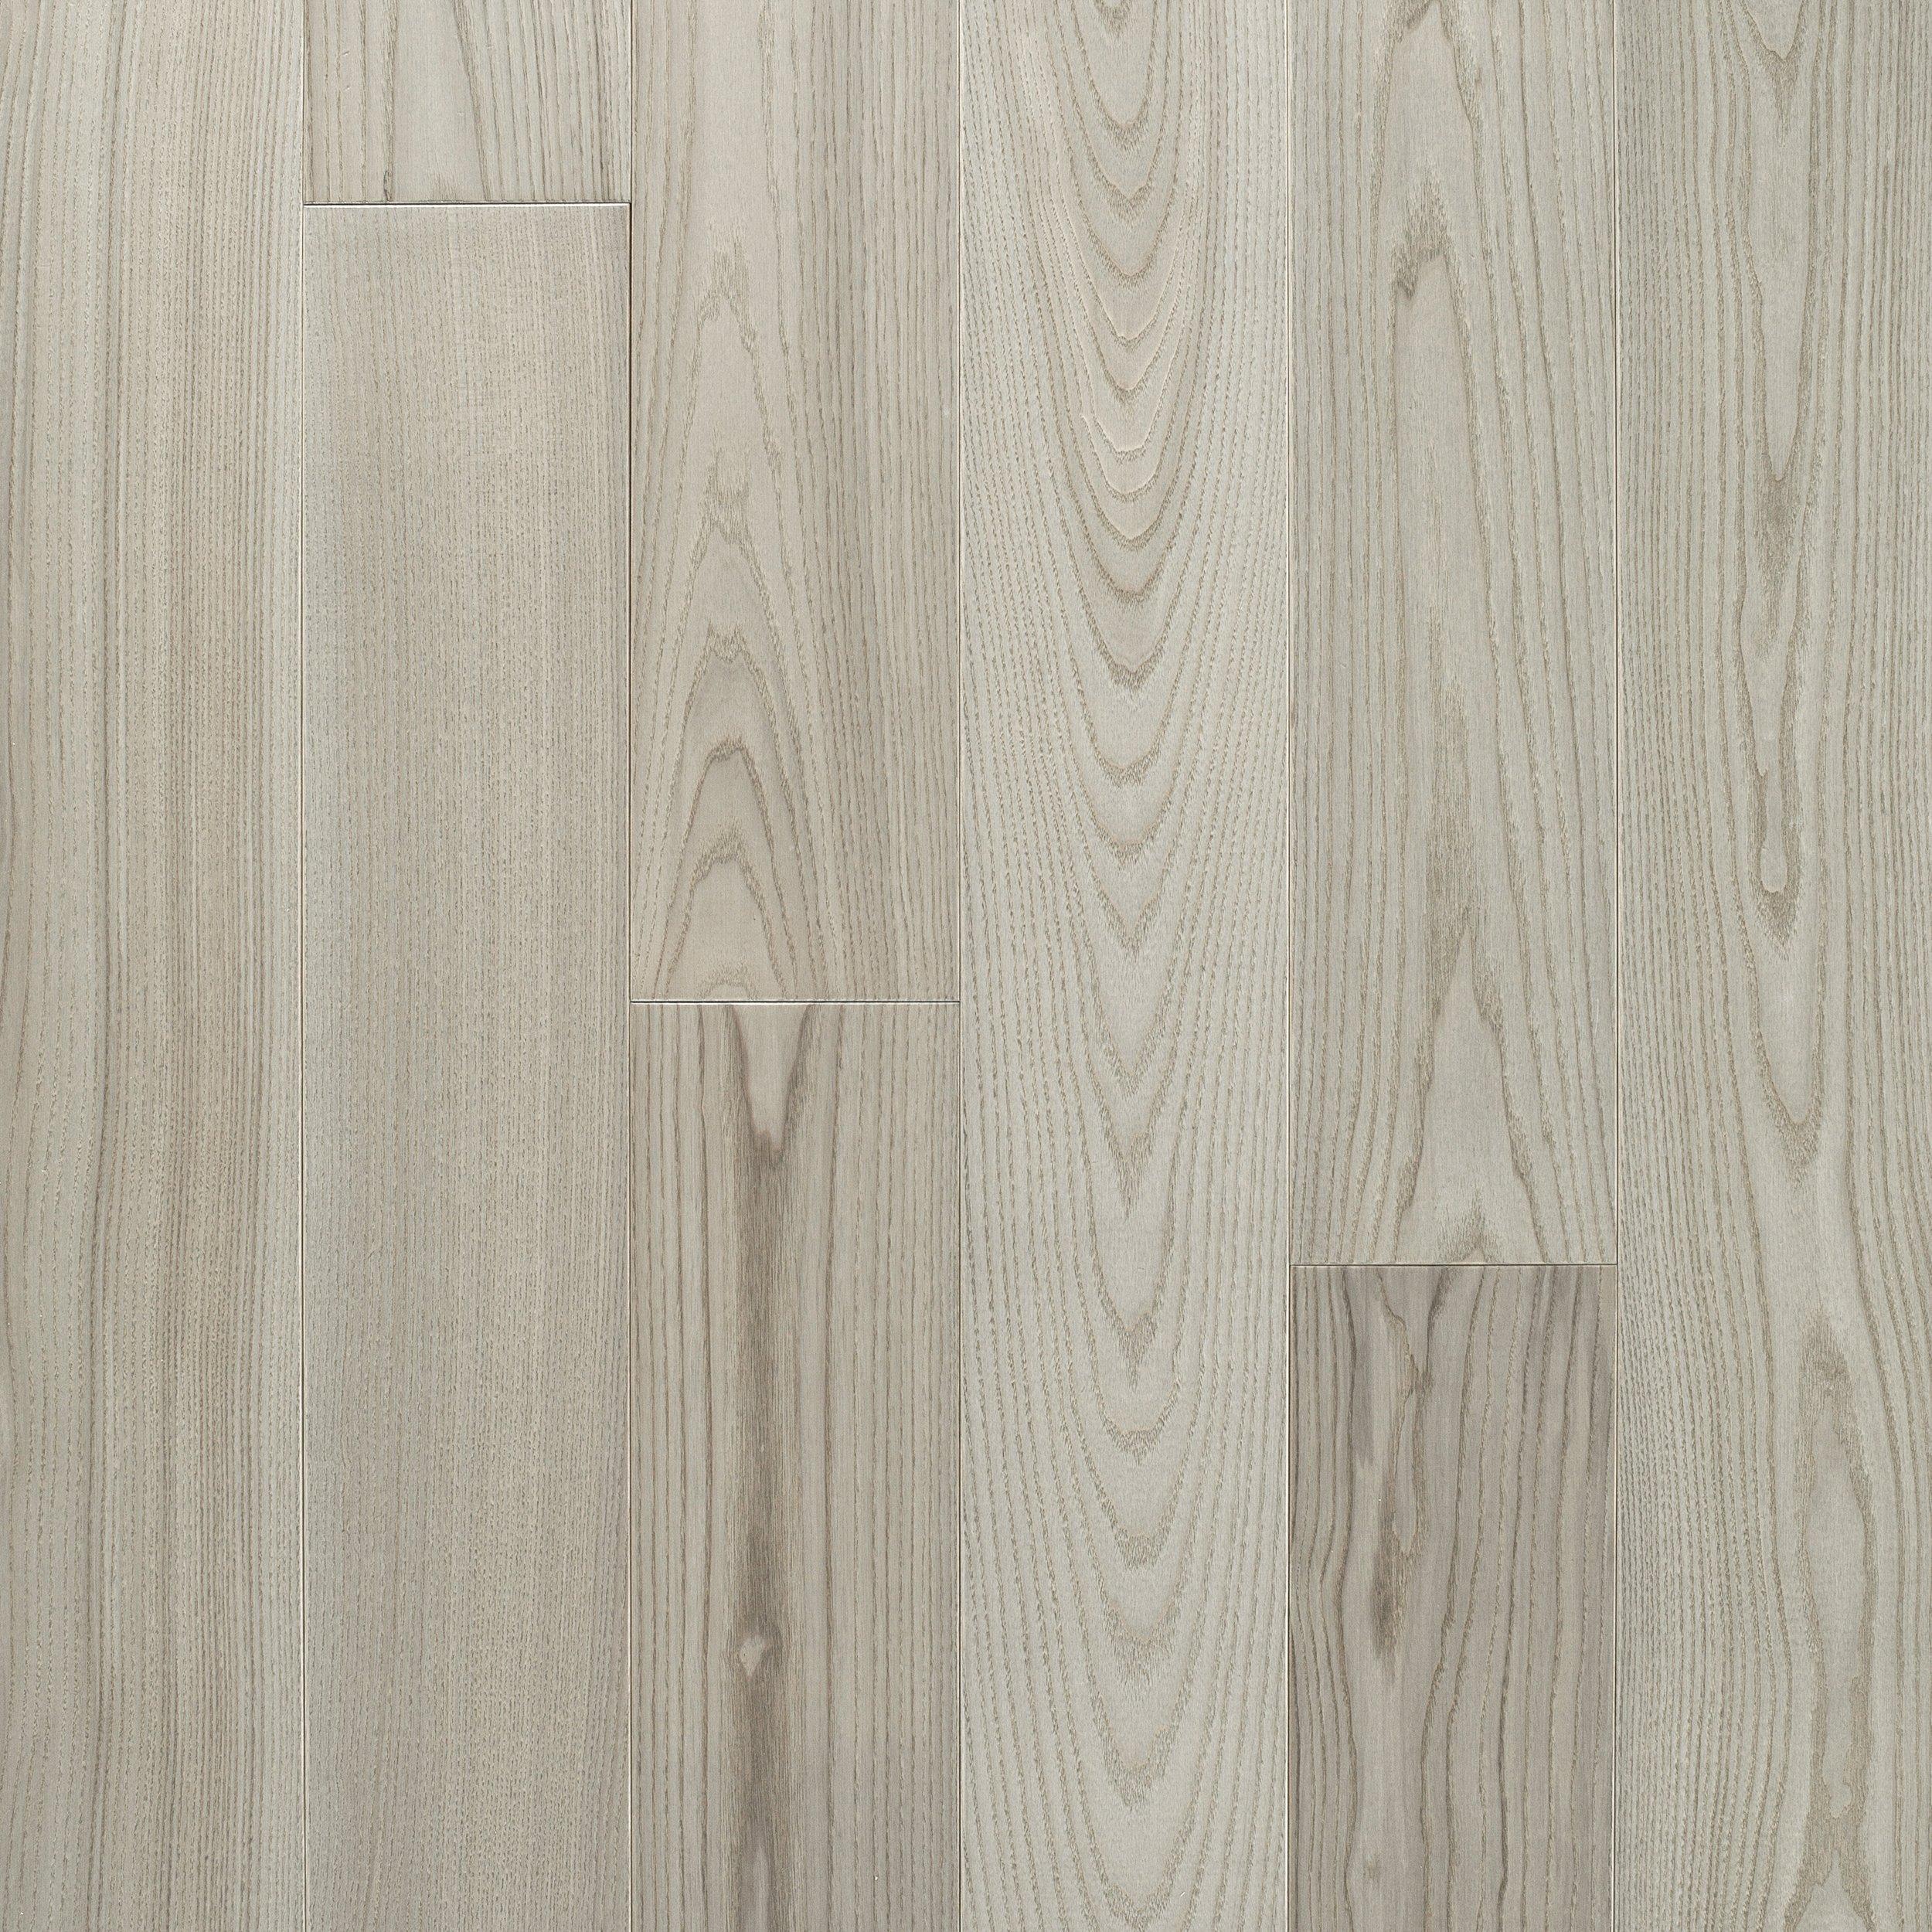 Zenia Ash Wire-Brushed Solid Hardwood